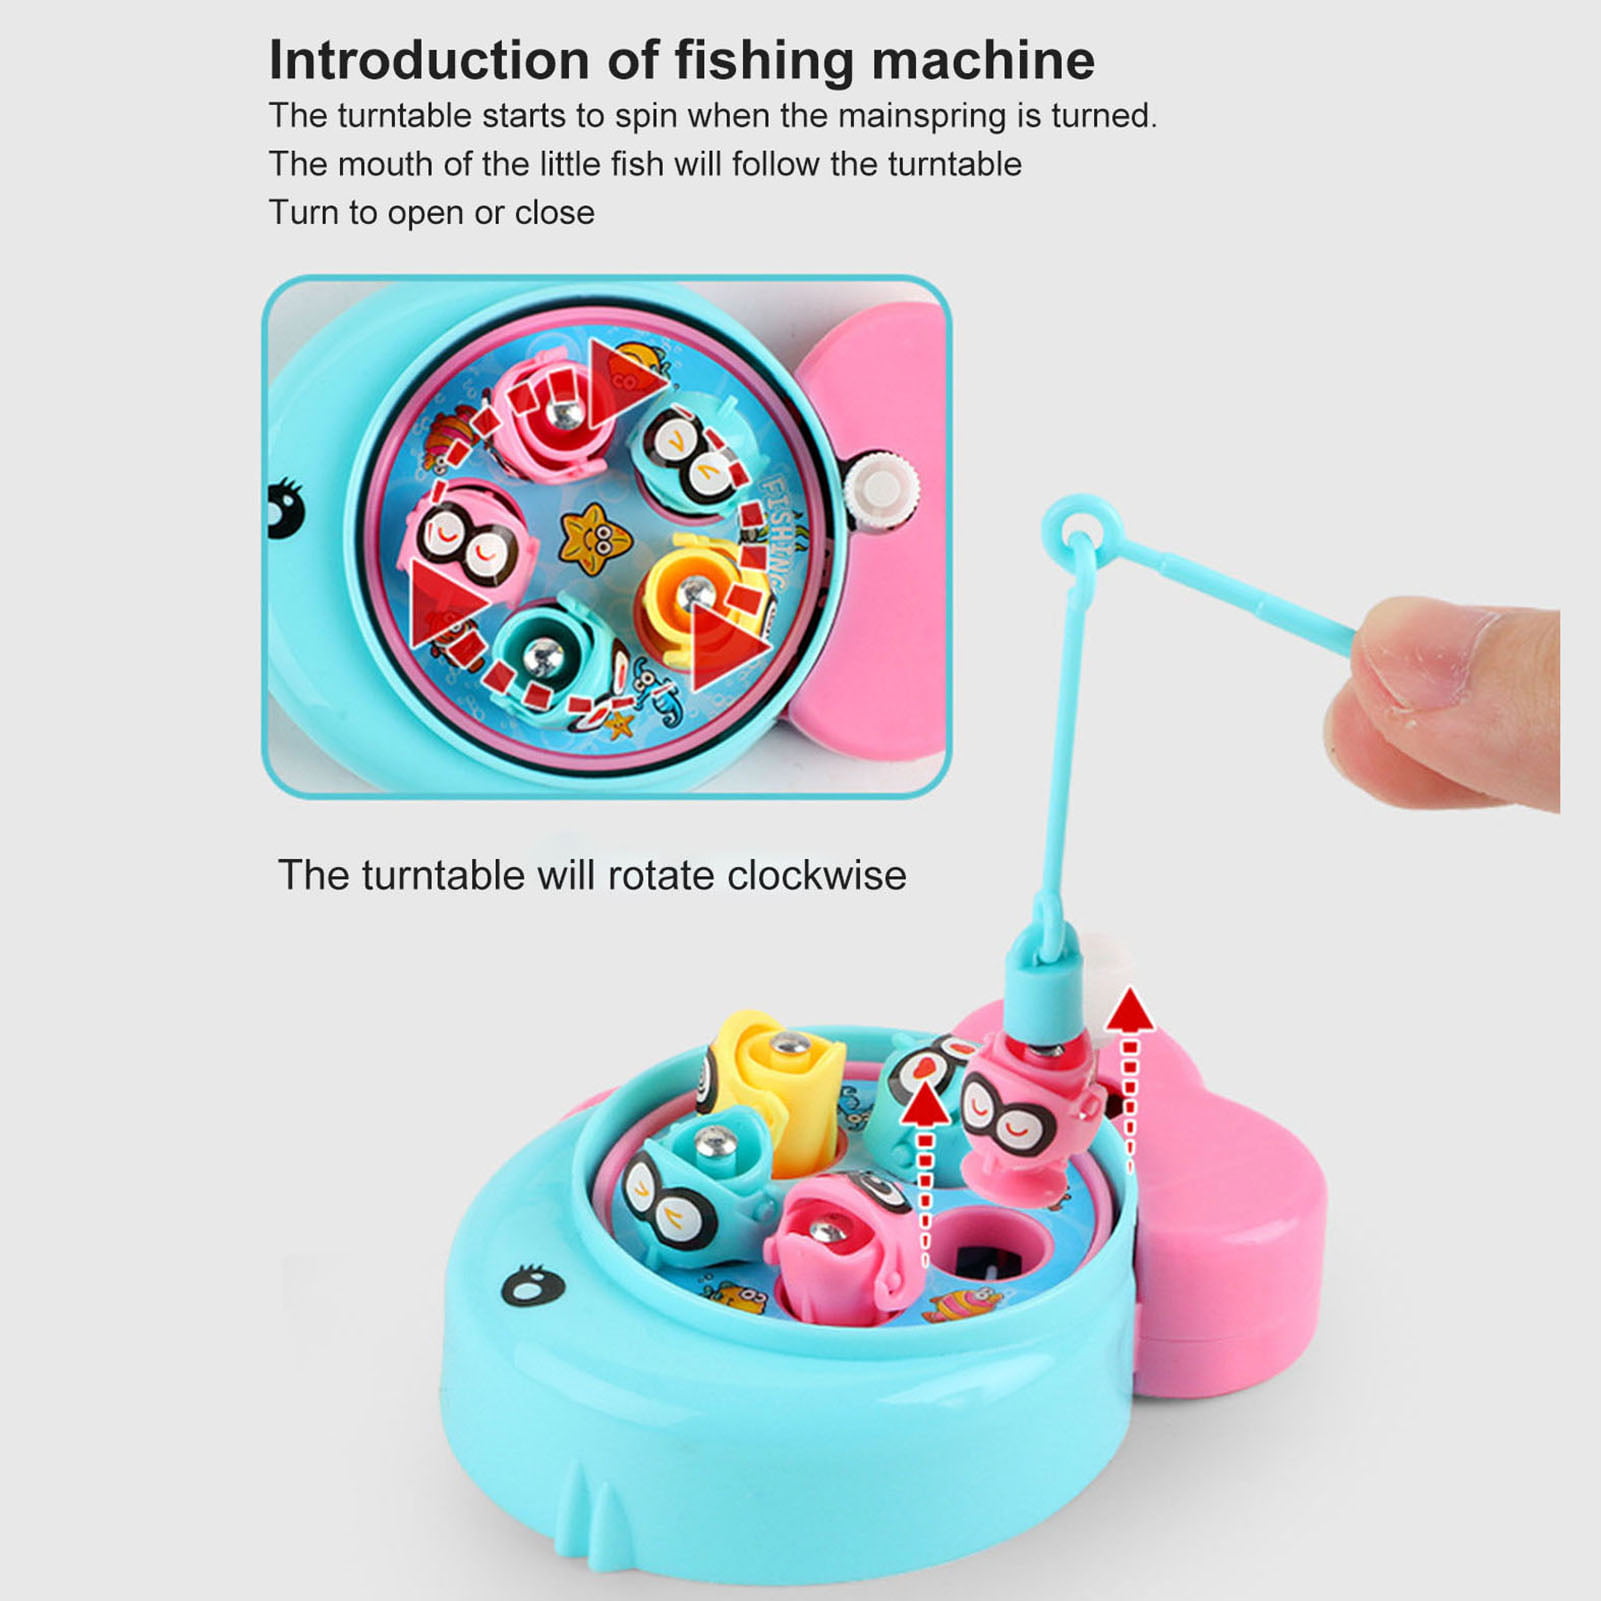 Mini Wind Up Gone Fishing Game - Magnetic Fishing Toy